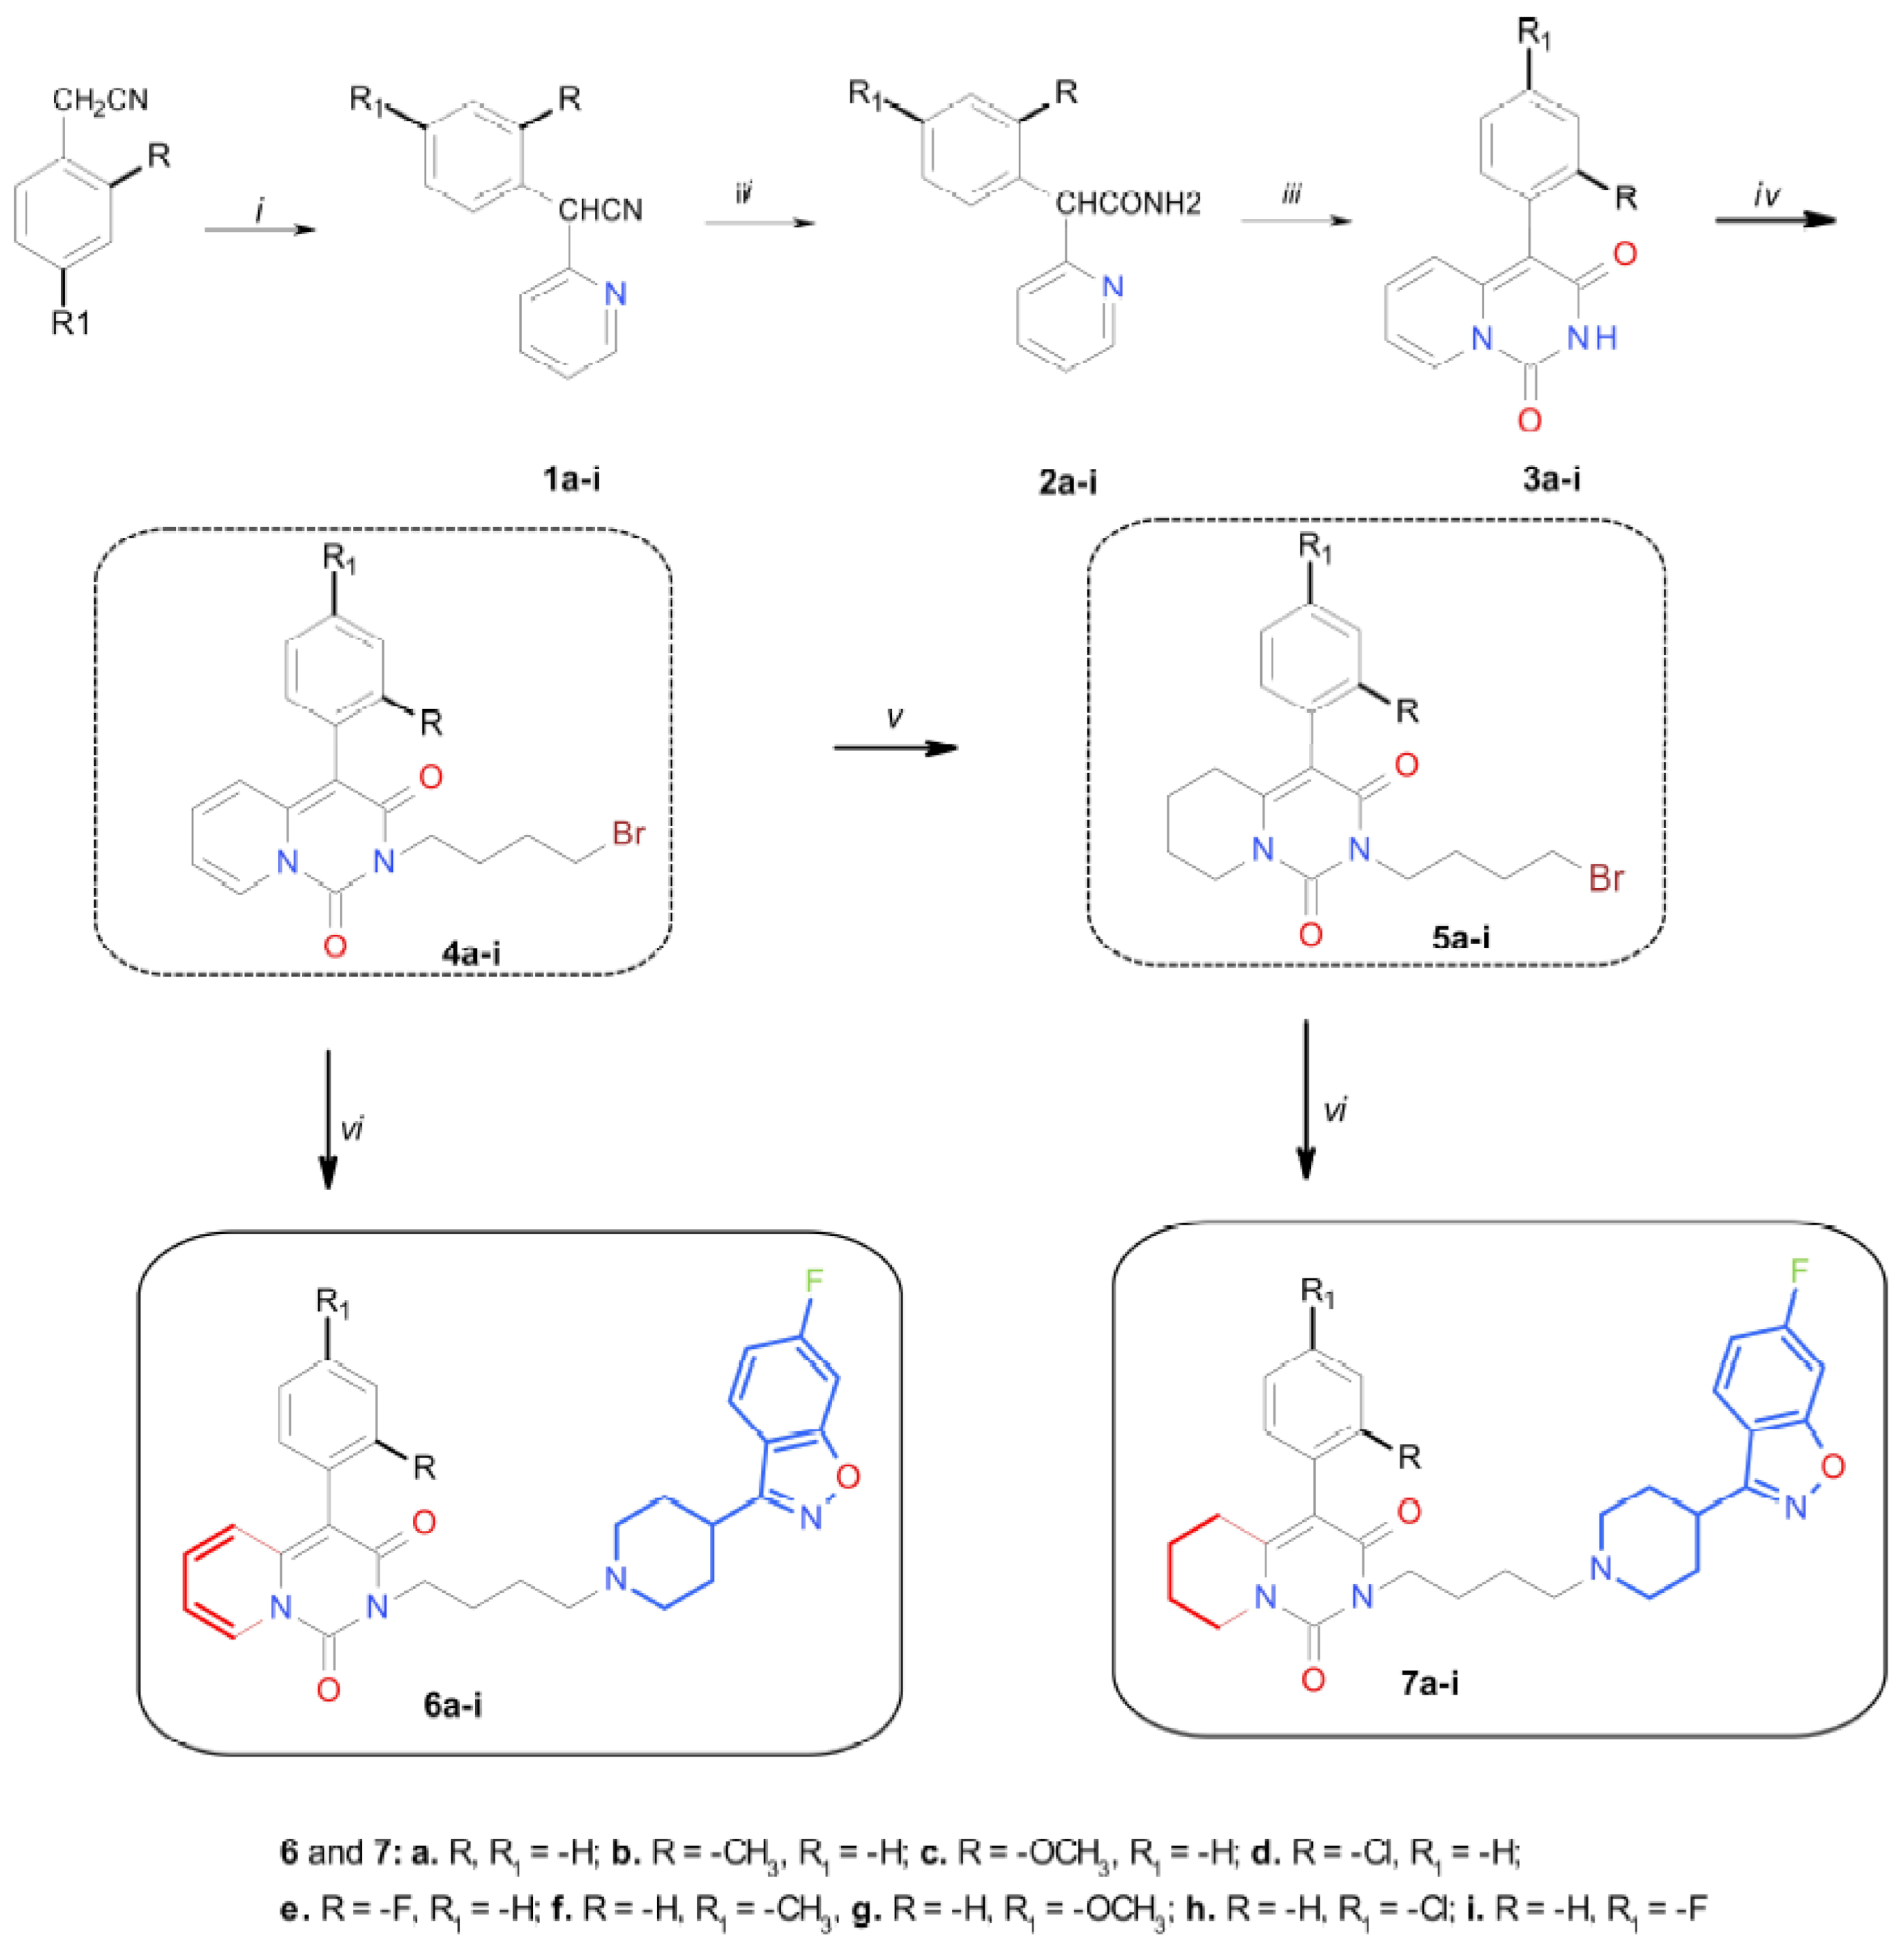 Ijms Free Full Text Synthesis Of Novel Pyrido 1 2 C Pyrimidine Derivatives With 6 Fluoro 3 4 Piperidynyl 1 2 Benzisoxazole Moiety As Potential Ssri And 5 Ht1a Receptor Ligands